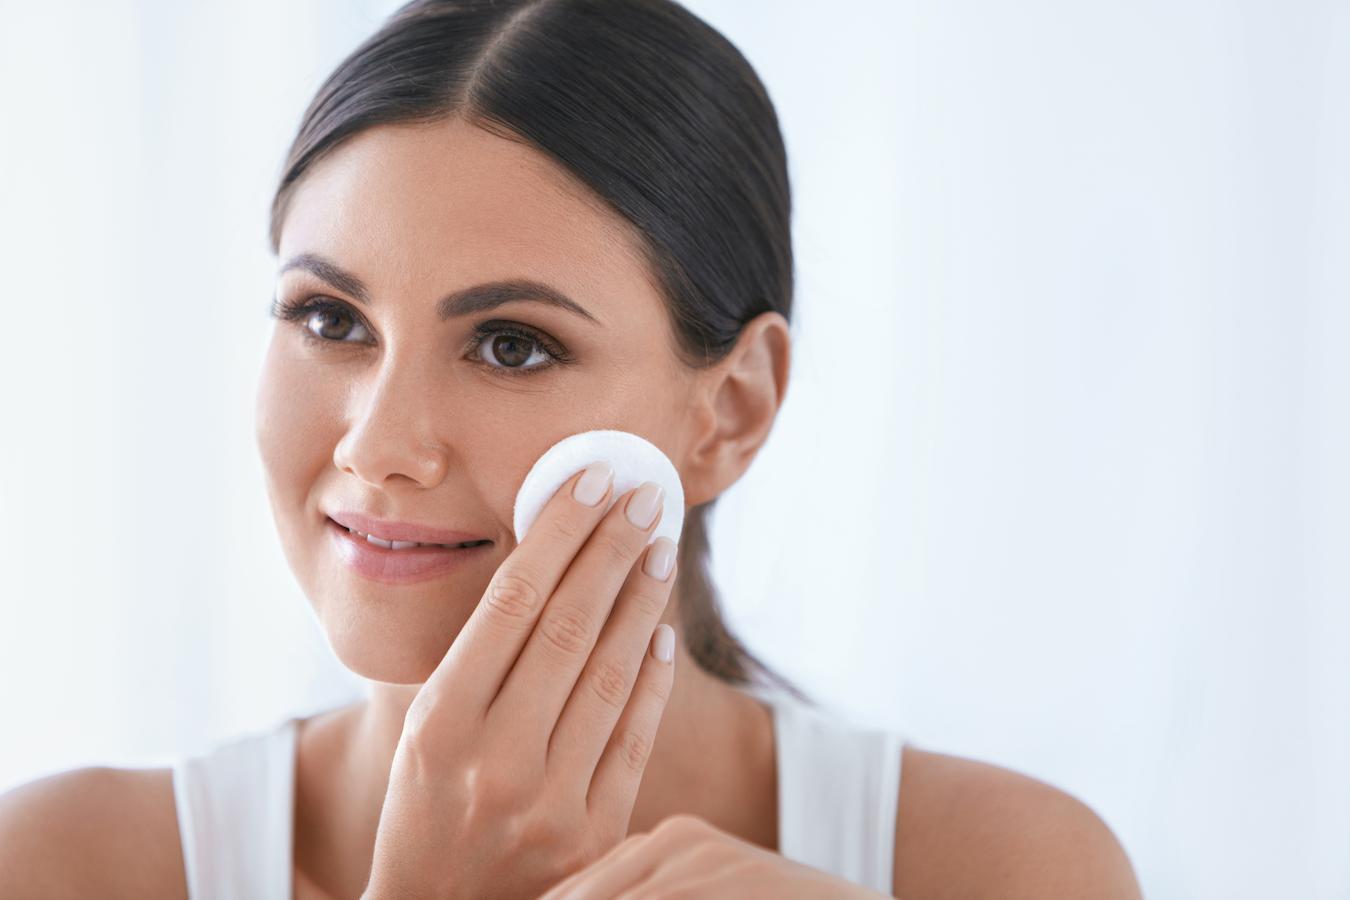 You can still use a facial toner and moisturizer even if you have sensitive skin